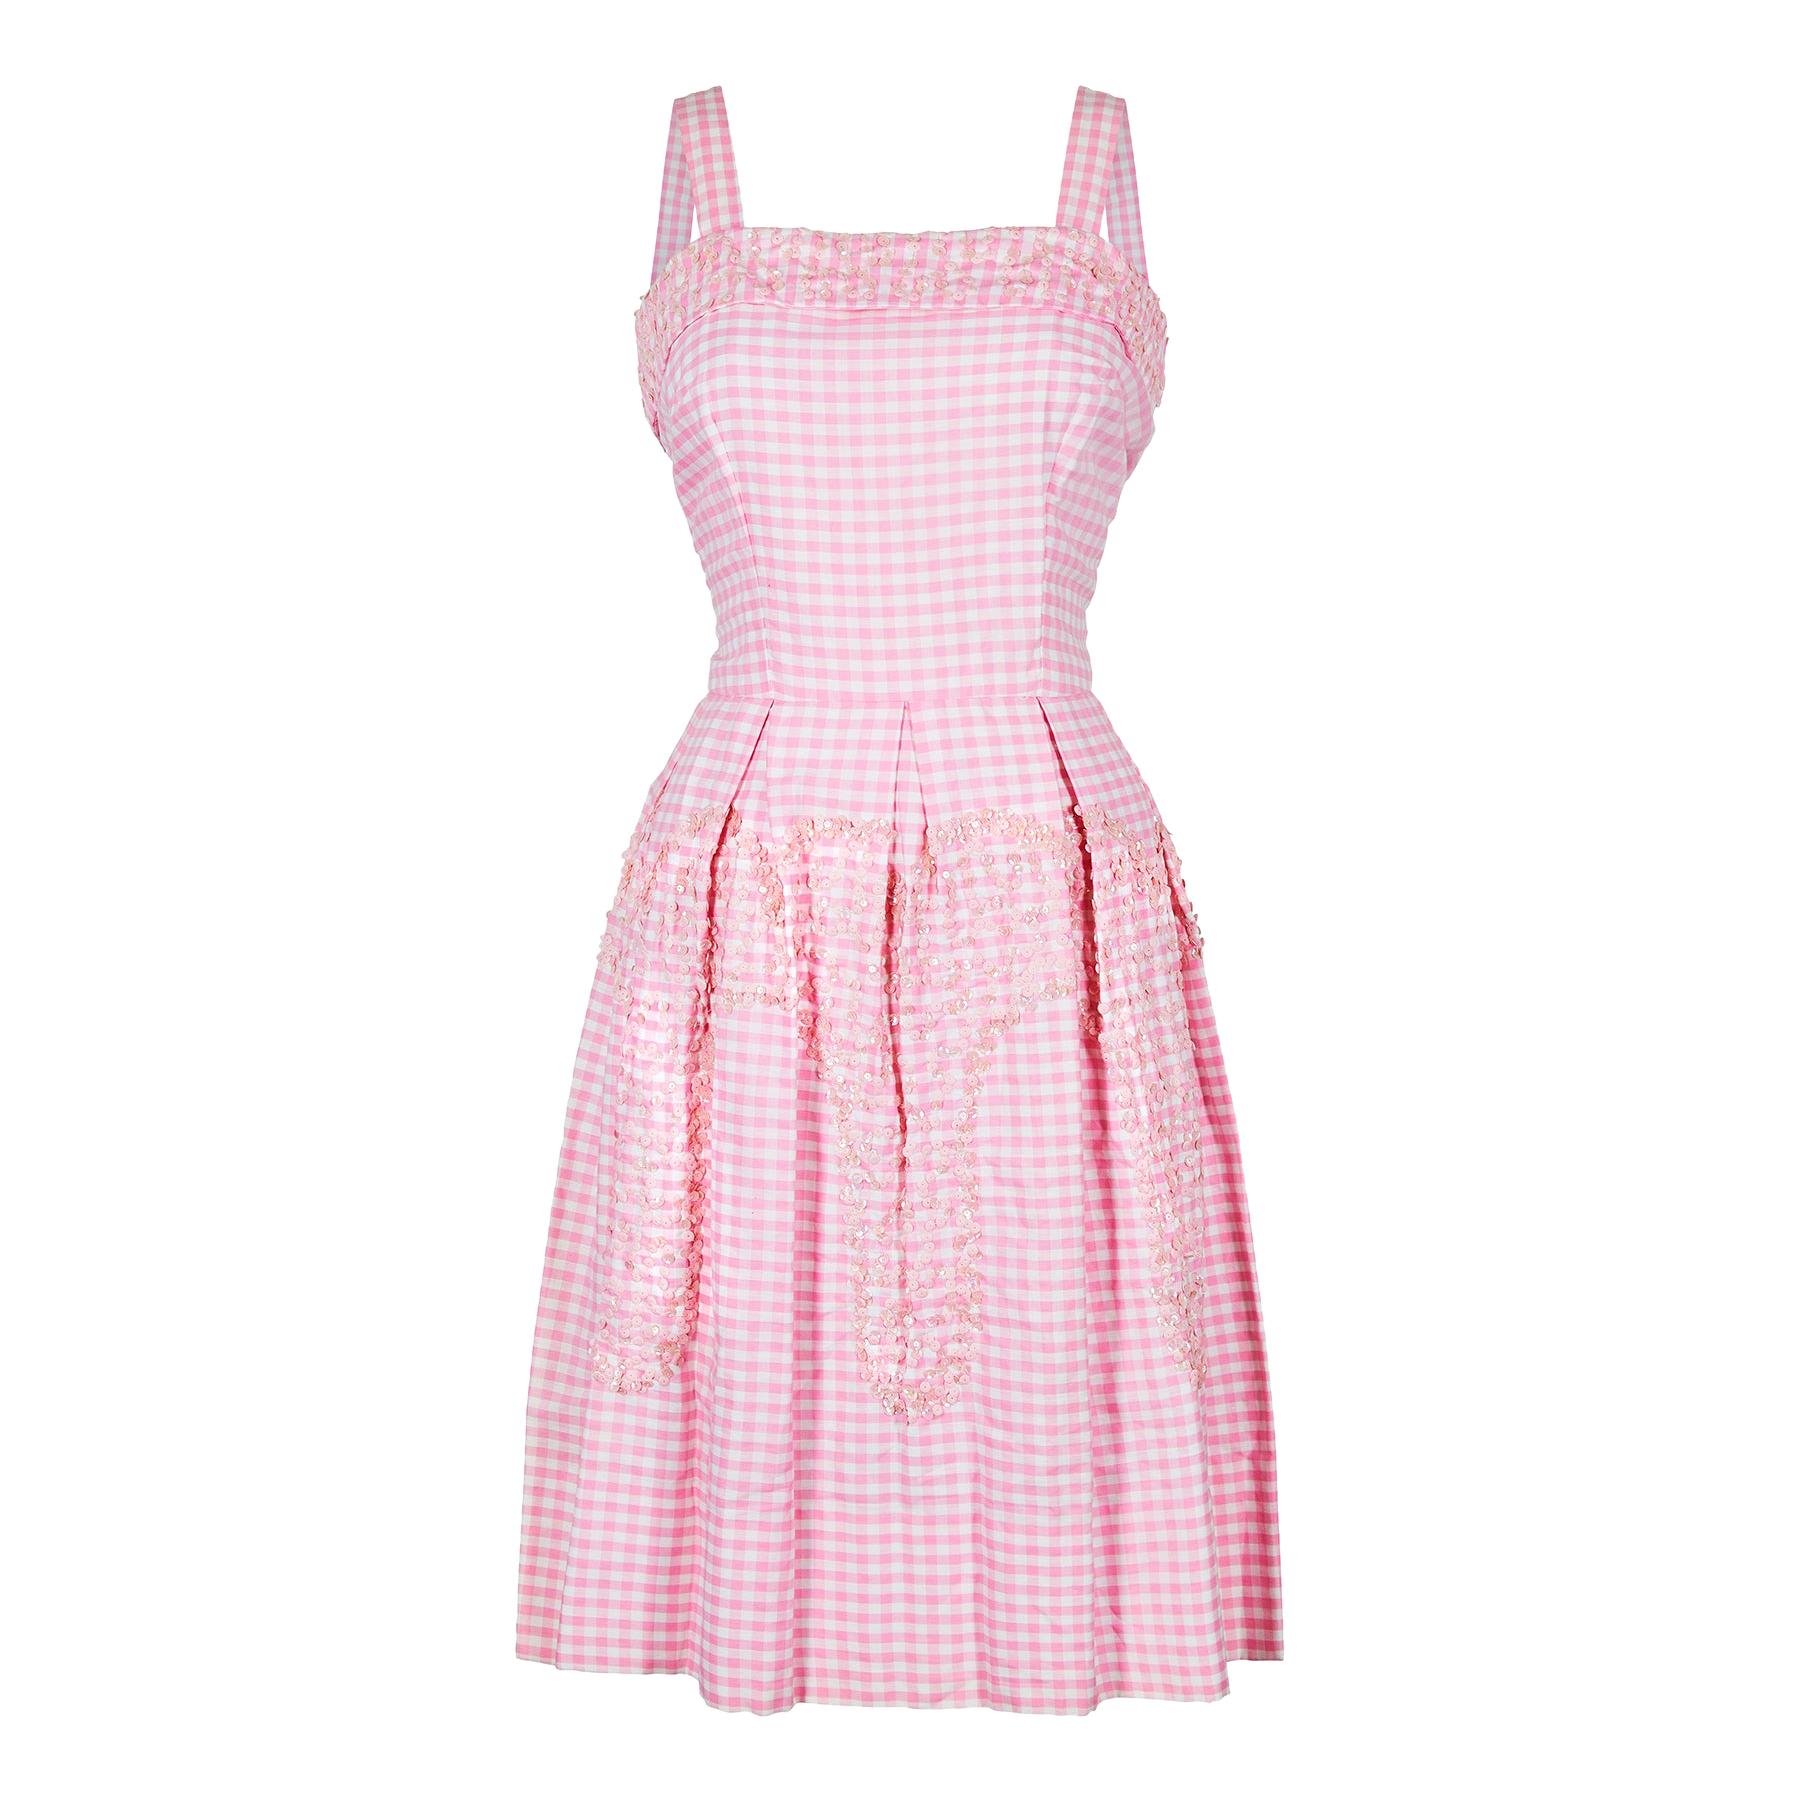  1950s Pink and White Gingham Check Sequinned Dress